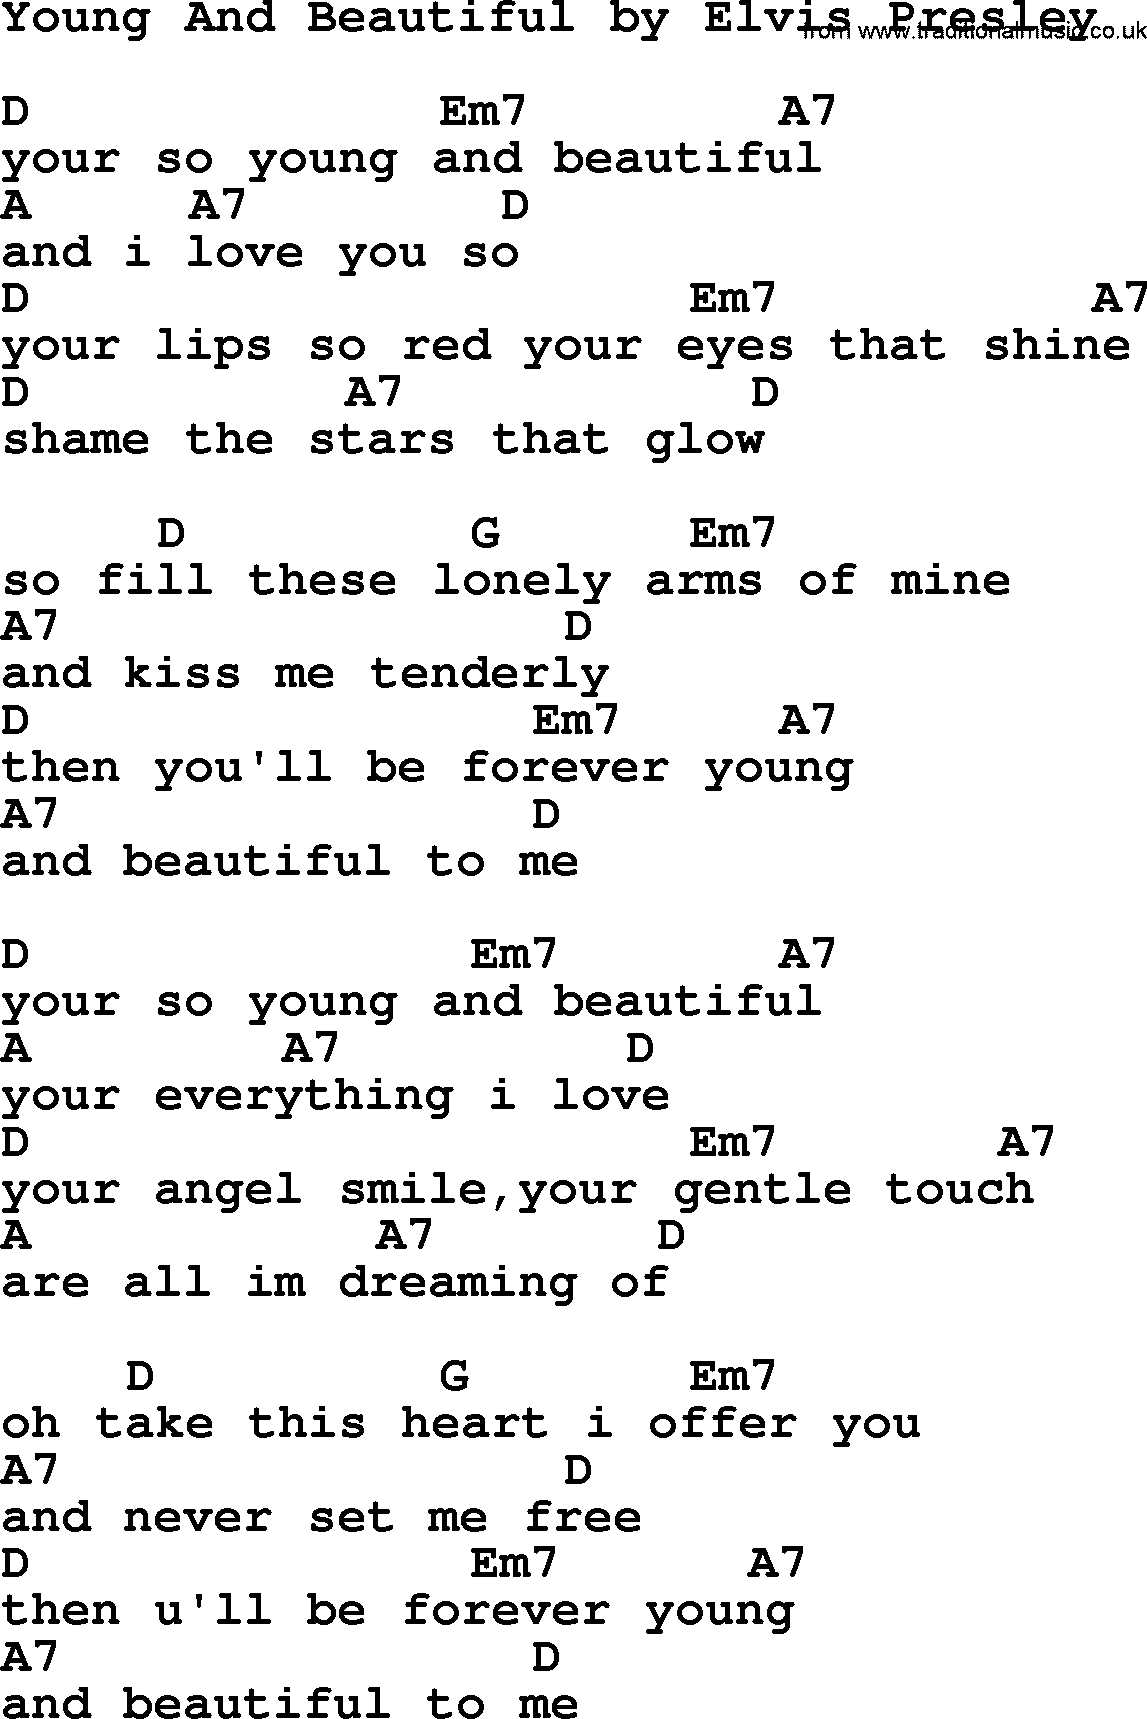 Elvis Presley song: Young And Beautiful, lyrics and chords